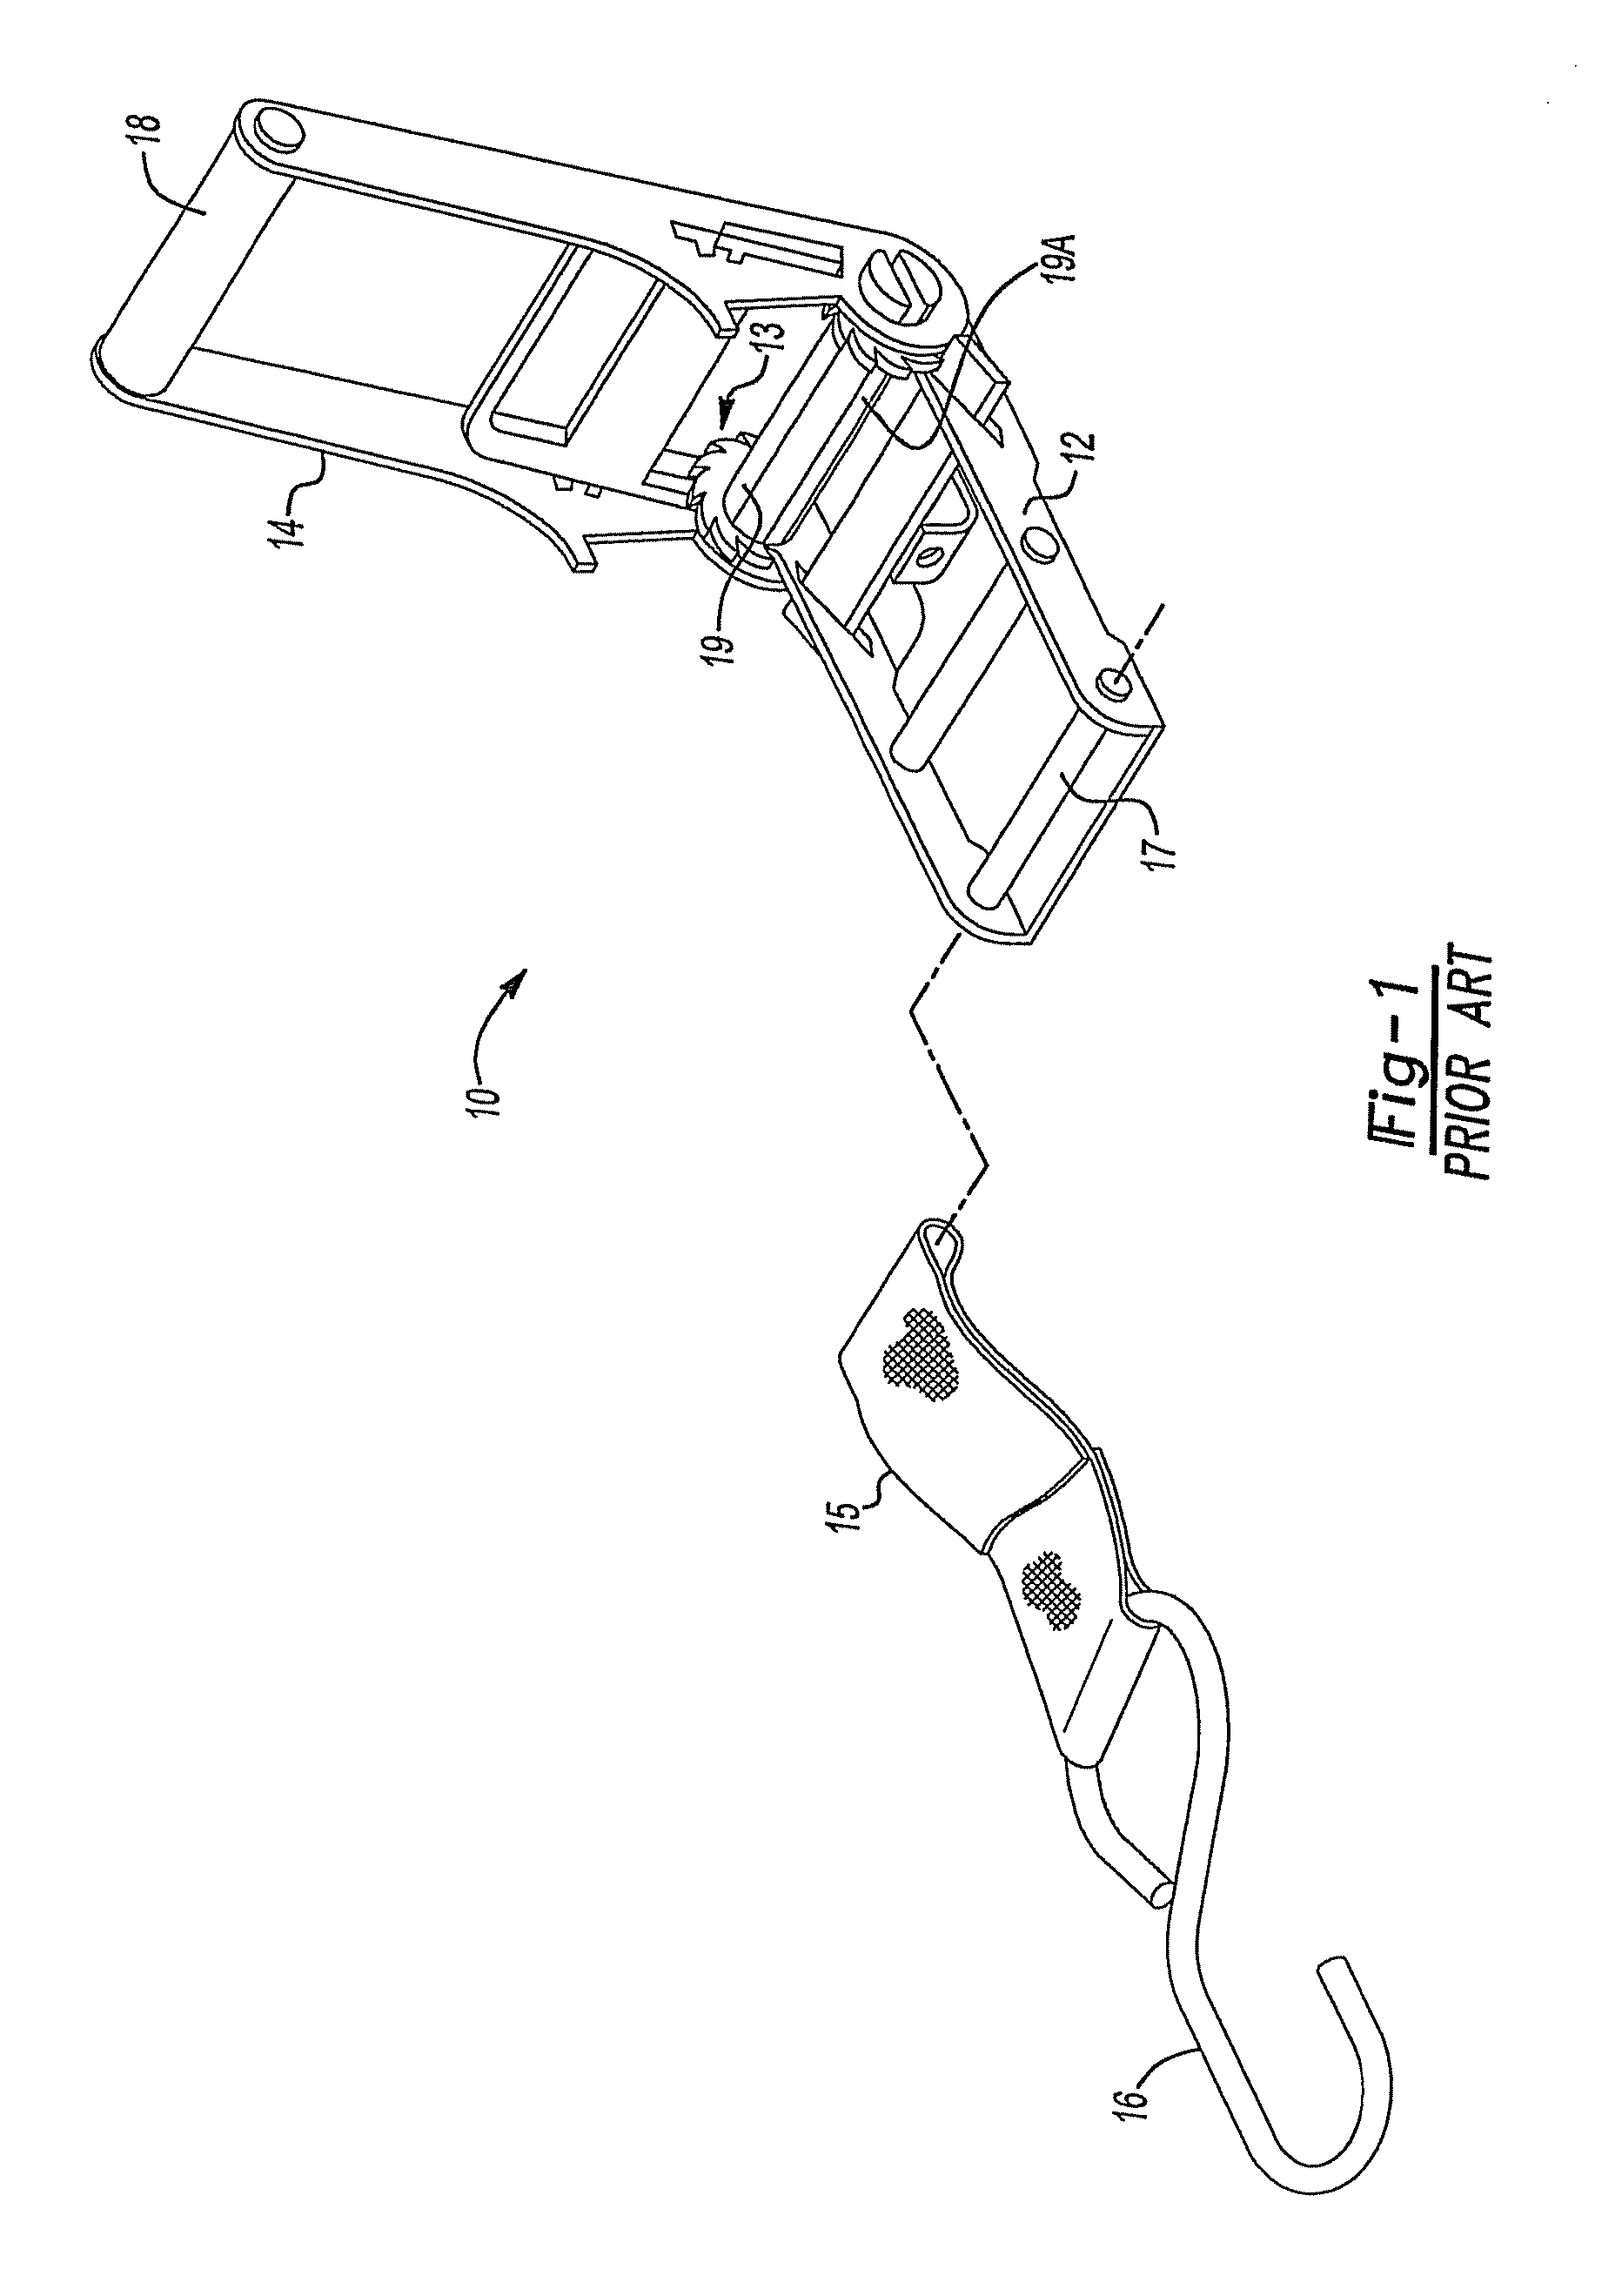 Cargo tightener and strap collector with improved release mechanism